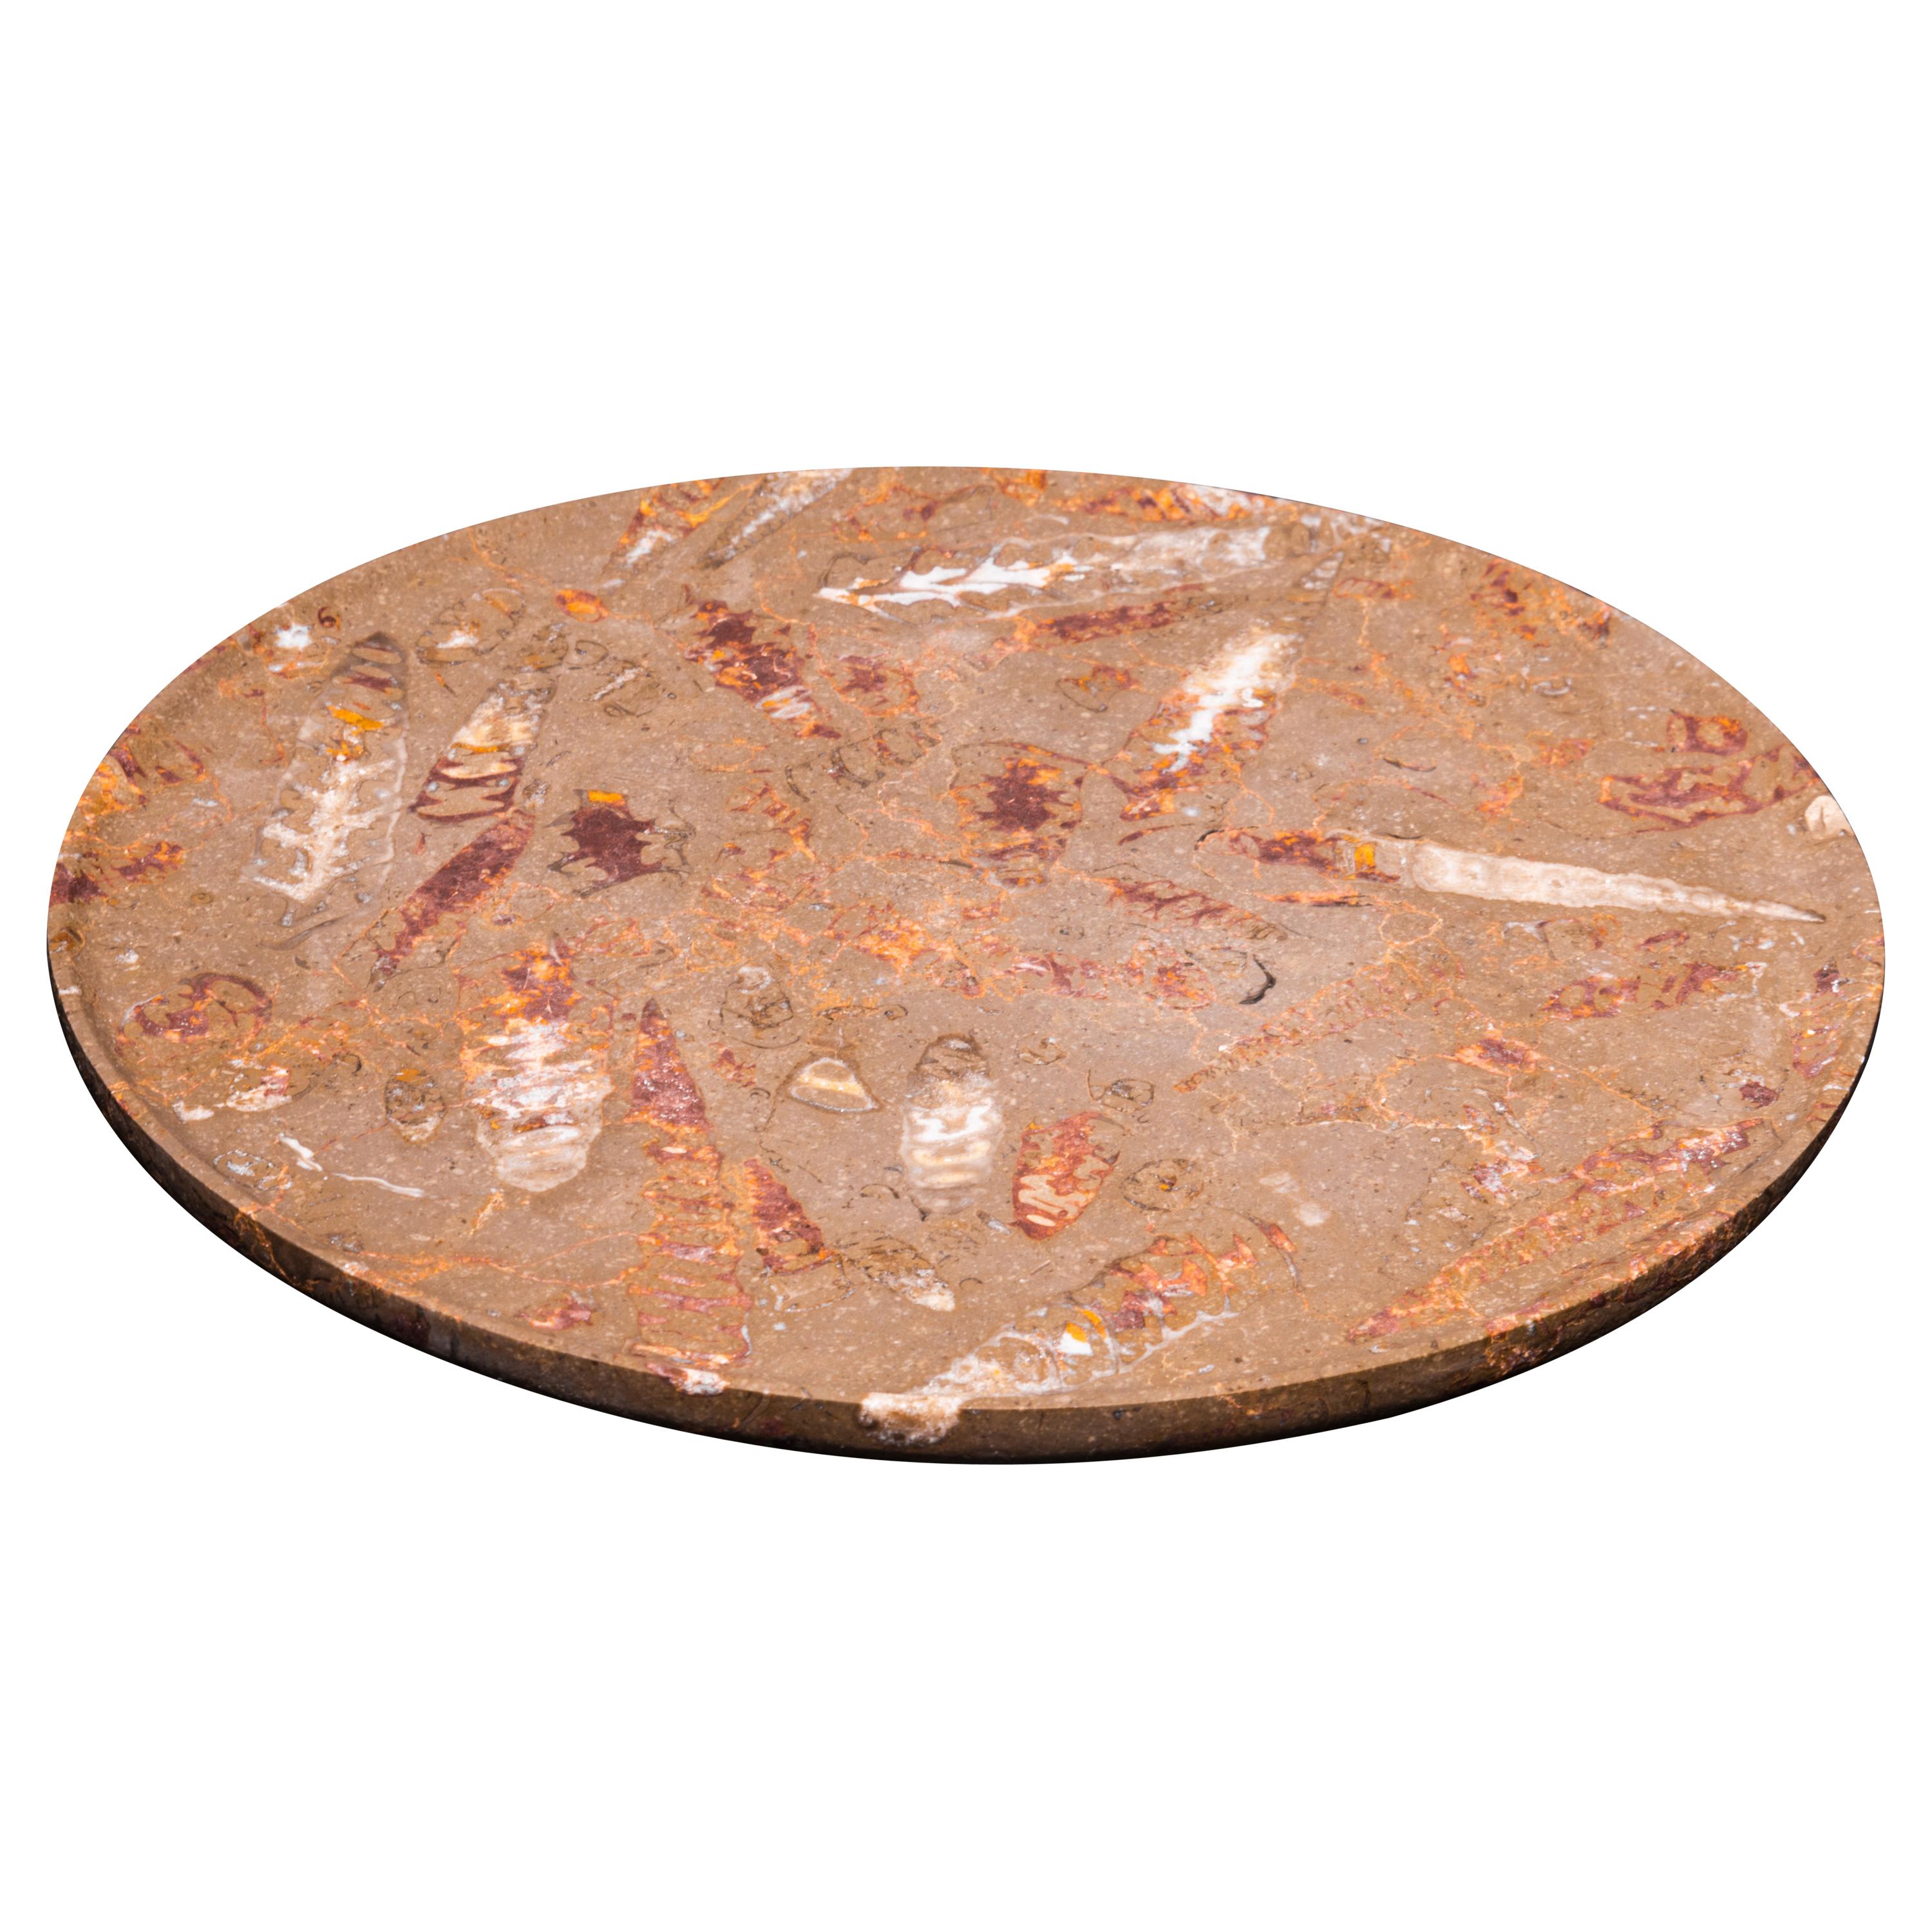 Aina Contemporary Jurassic Fossil Marble Mare Plate, Living Collection